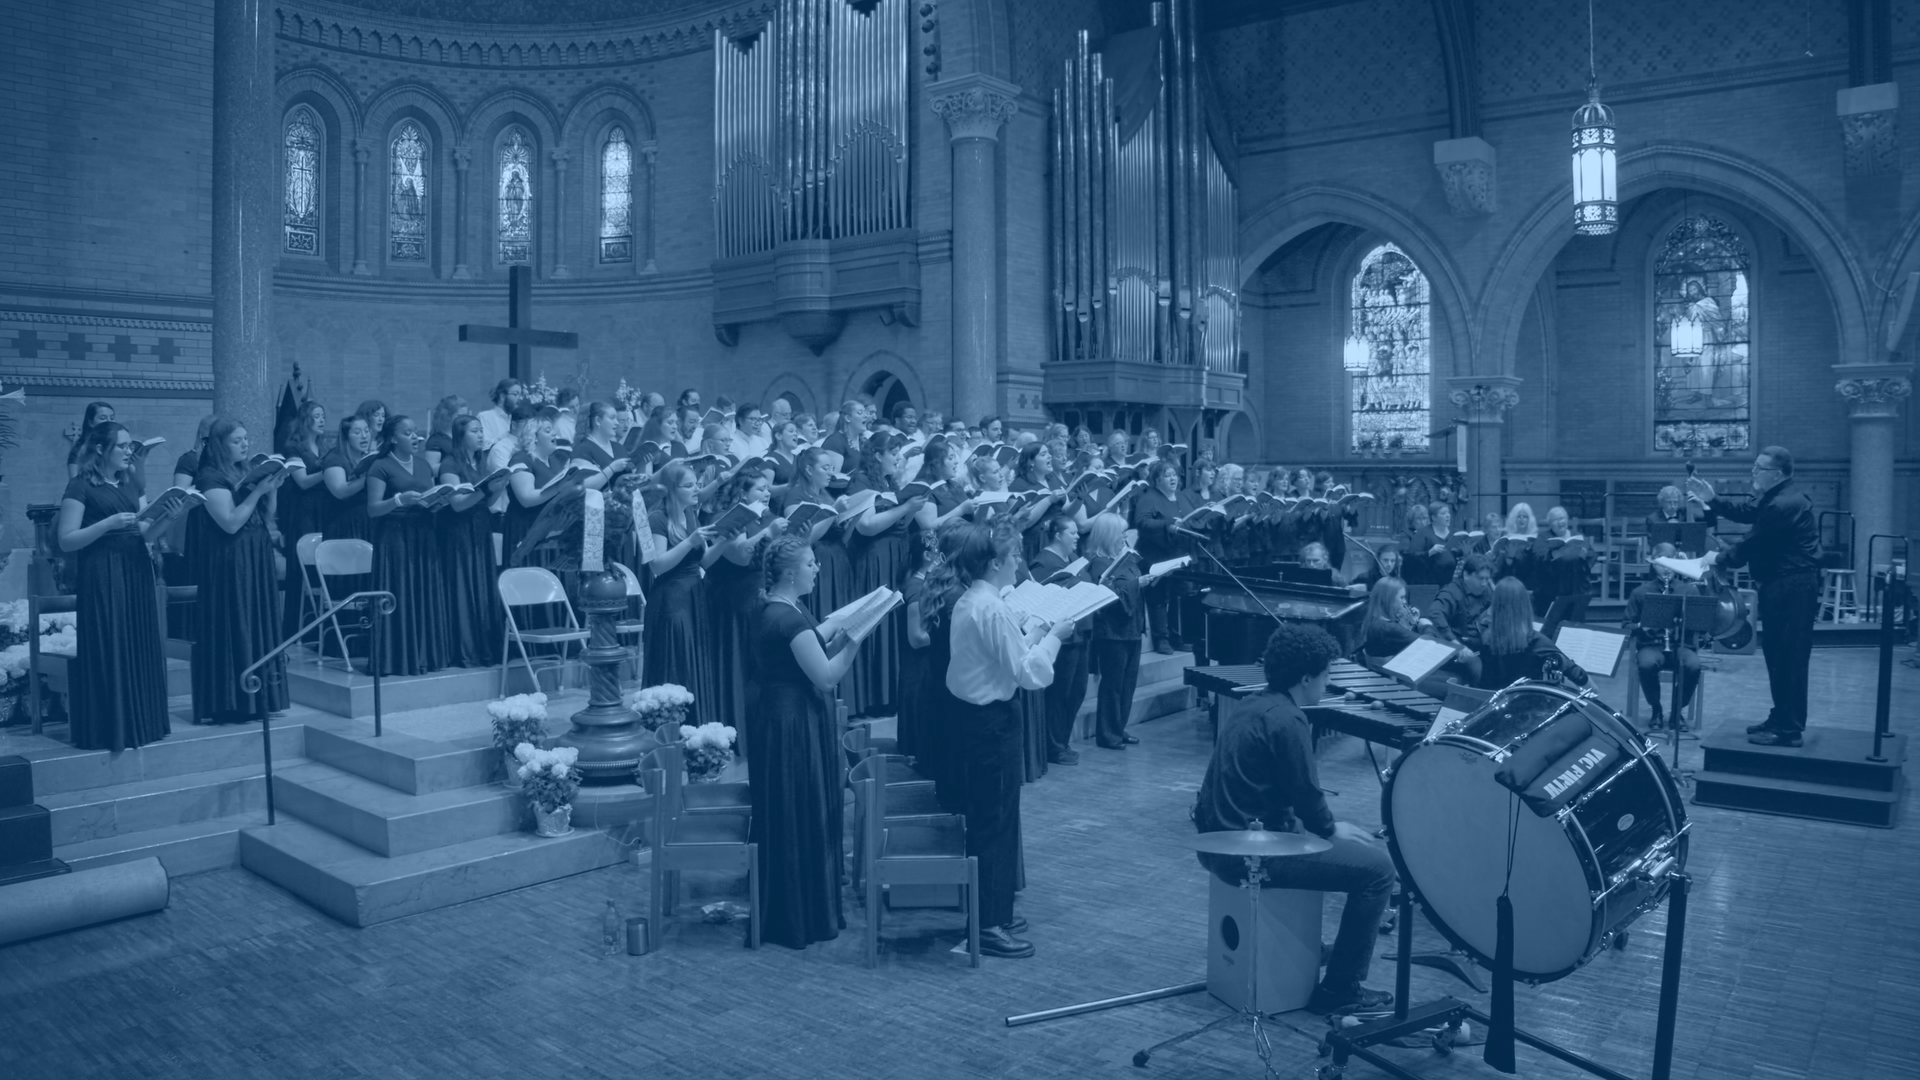 Choral Society of NEPA Website Landing Page Photo